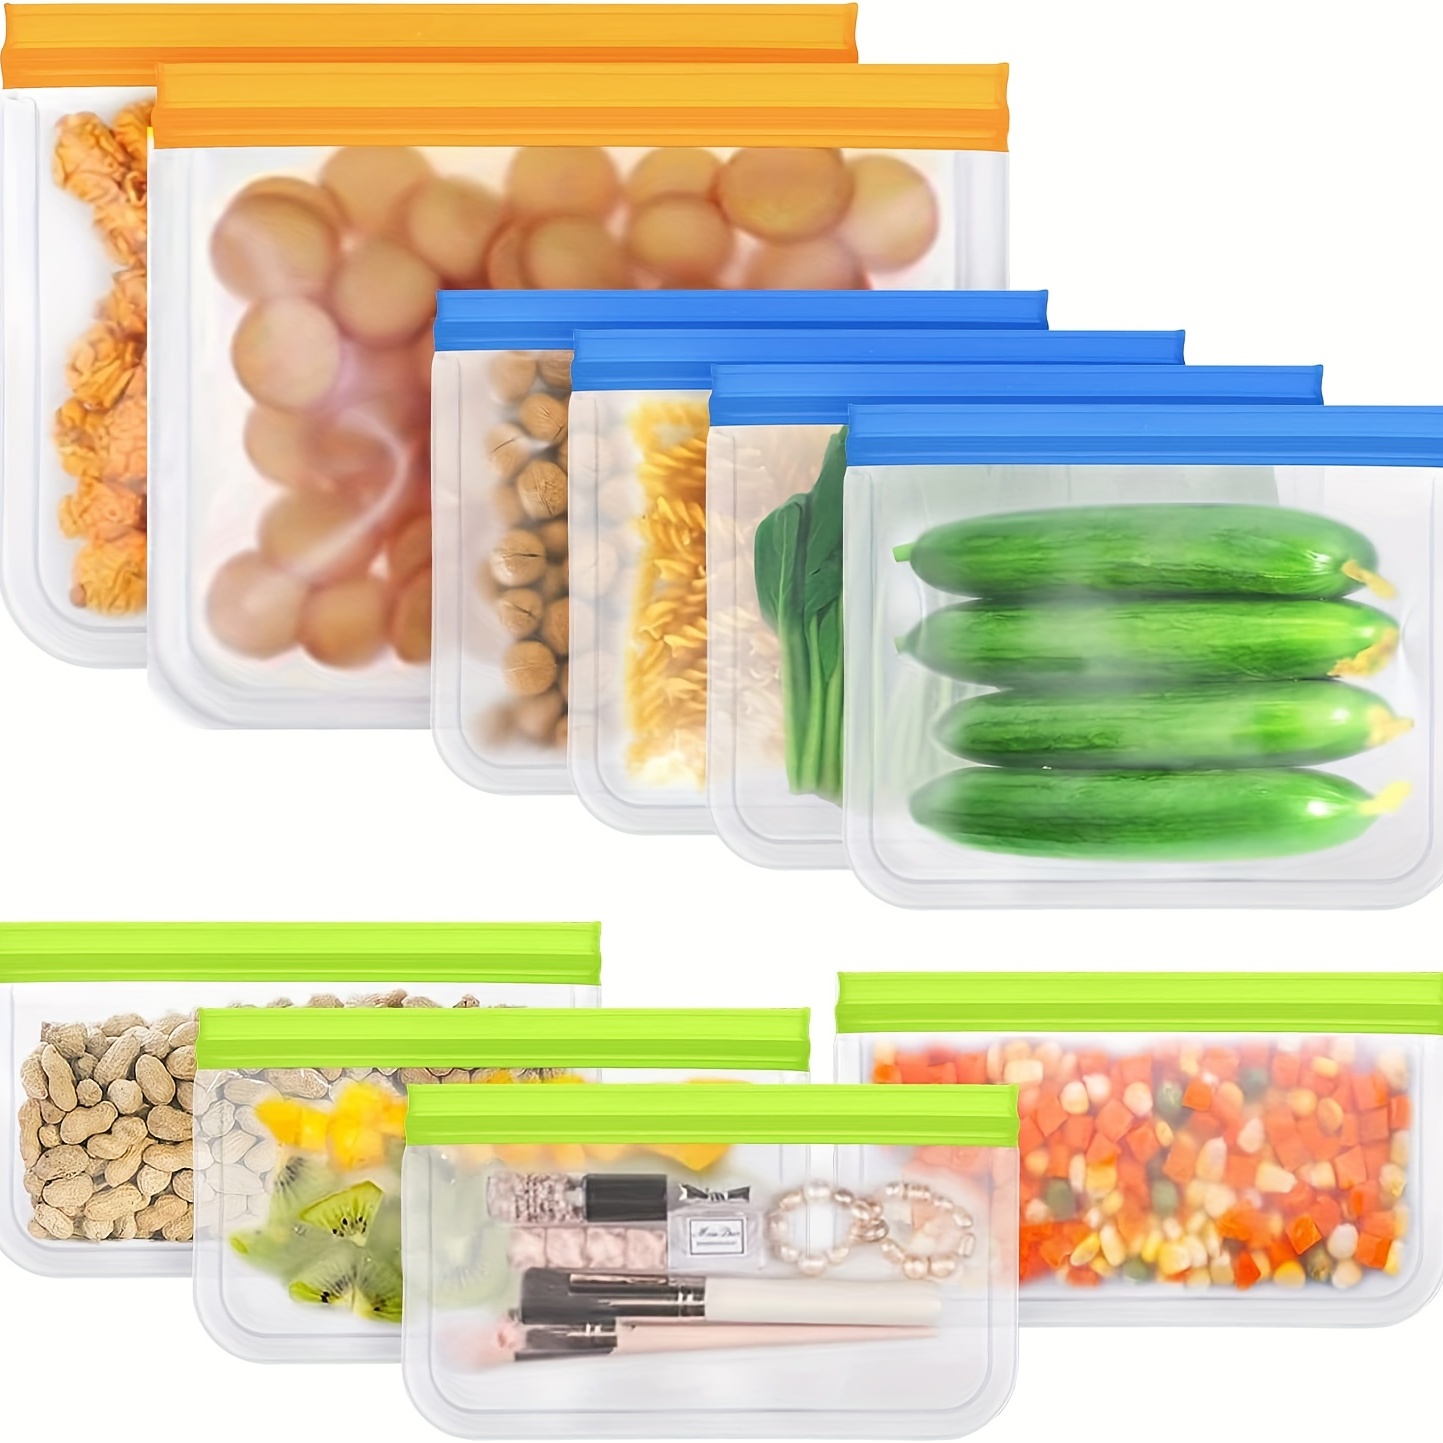 Bpa-free Reusable Food Storage Bags - Leakproof Snack And Sandwich Bags ...